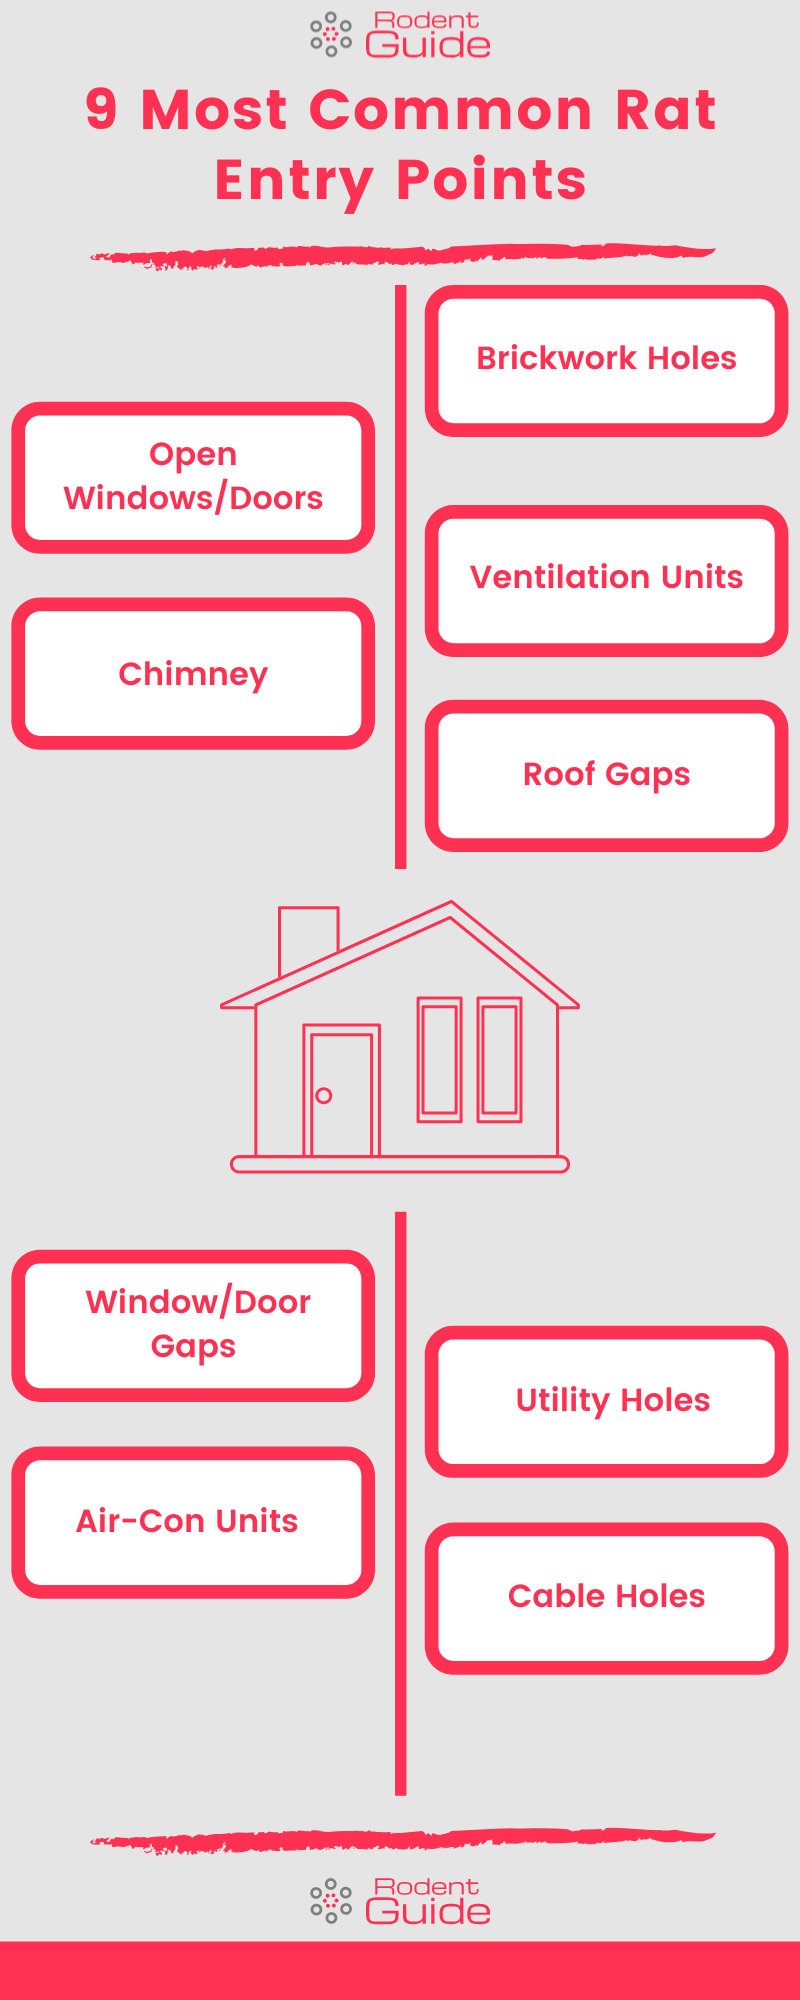 9 Most Common Rat Entry Points Infographic